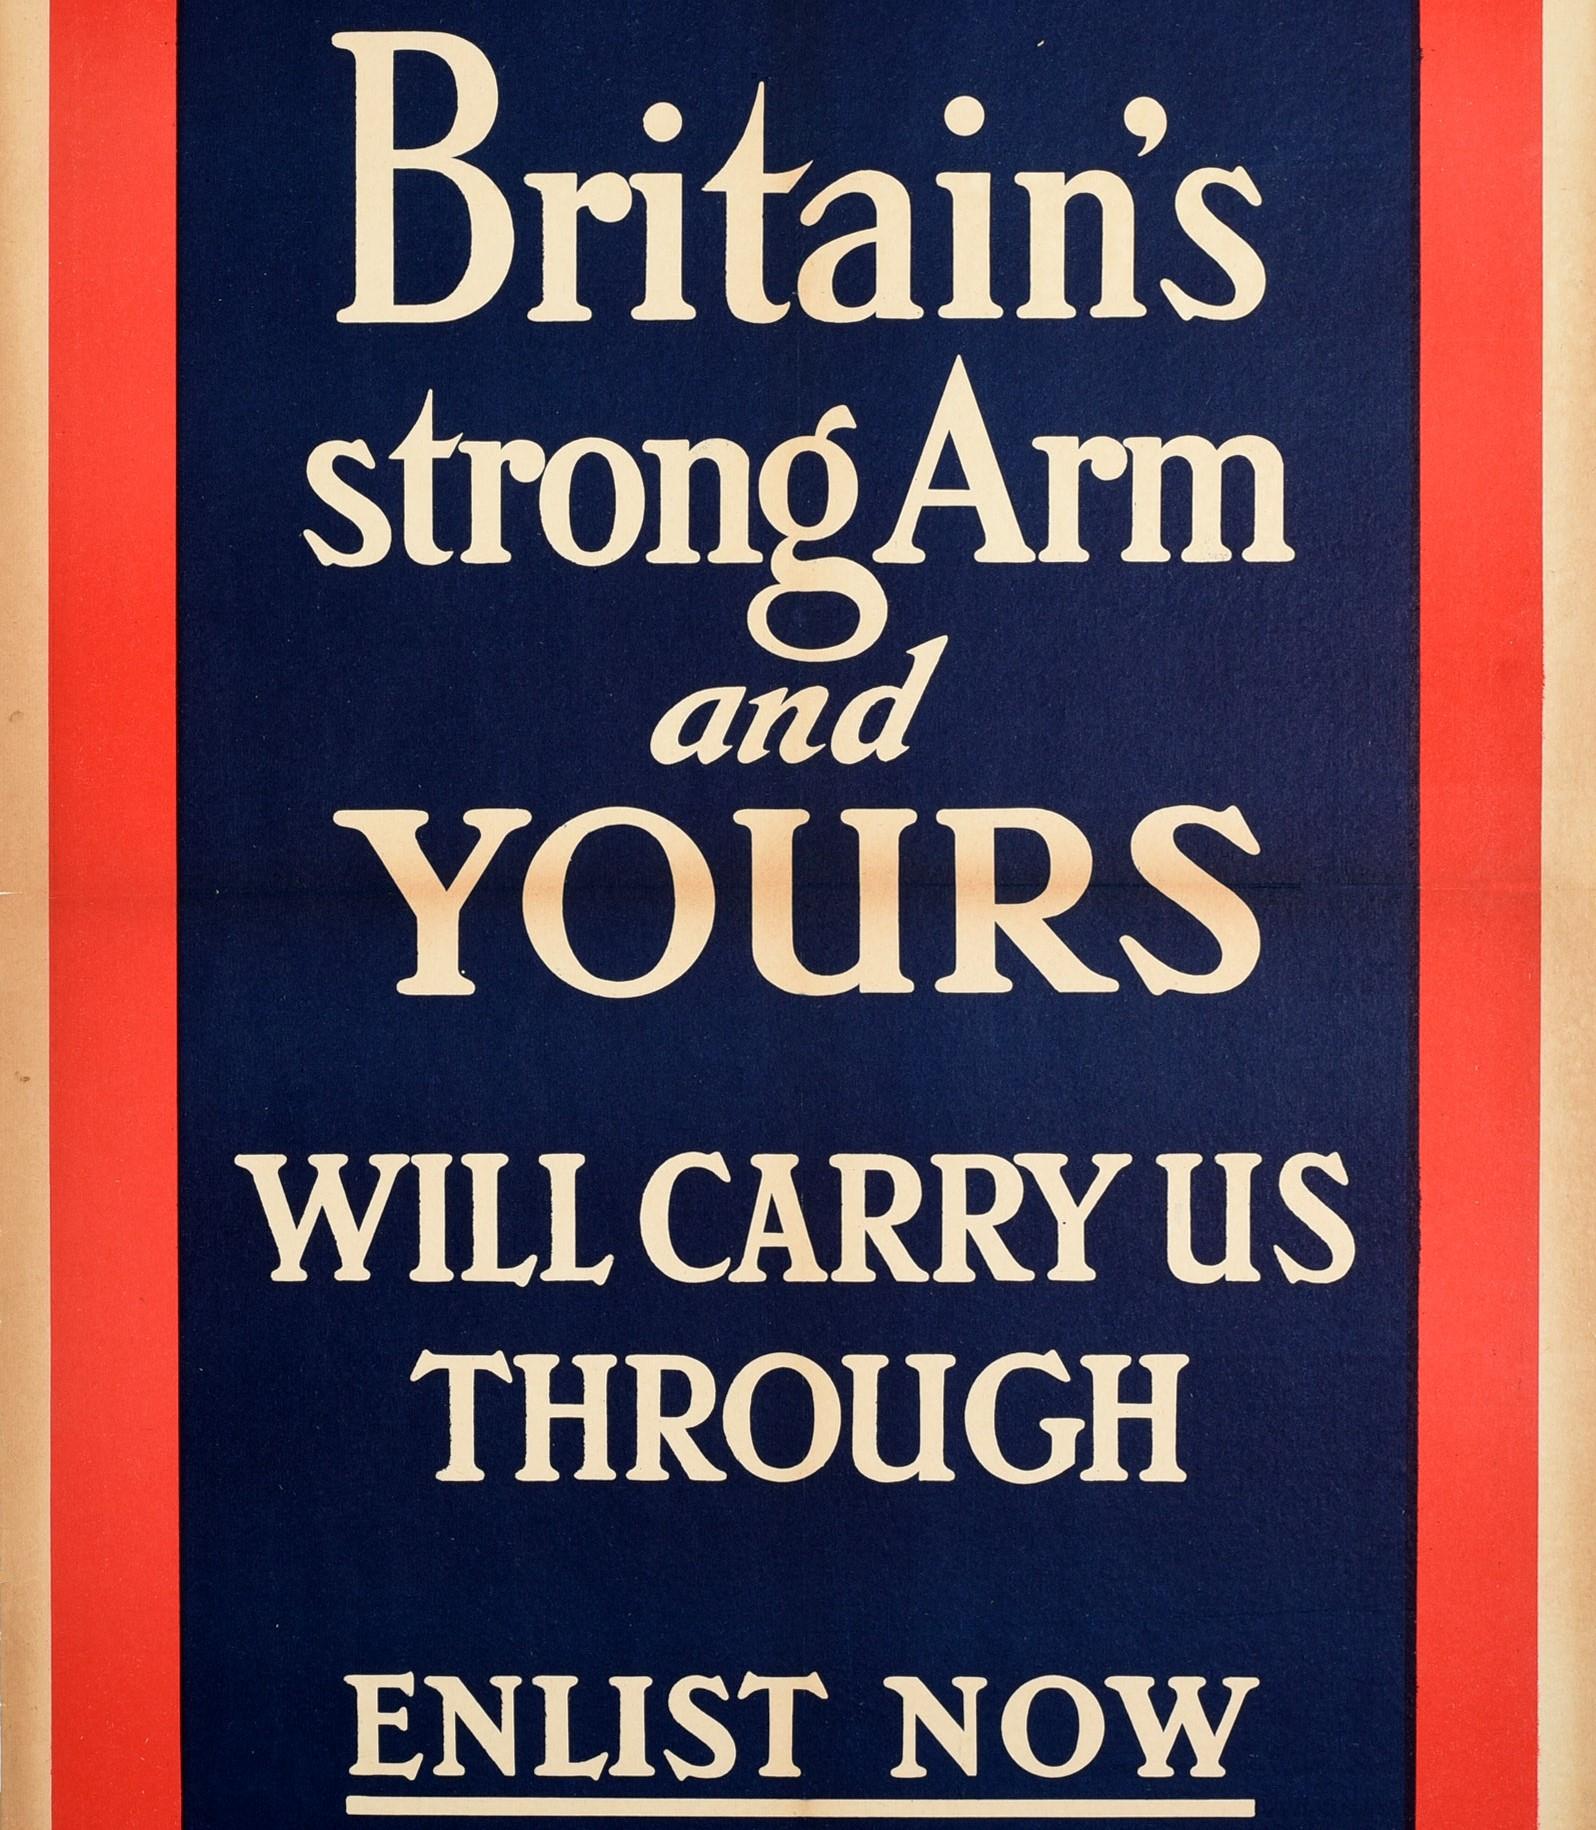 Original Antique Poster Britain's Strong Arm Enlist Now WWI Military Recruitment - Orange Print by Unknown